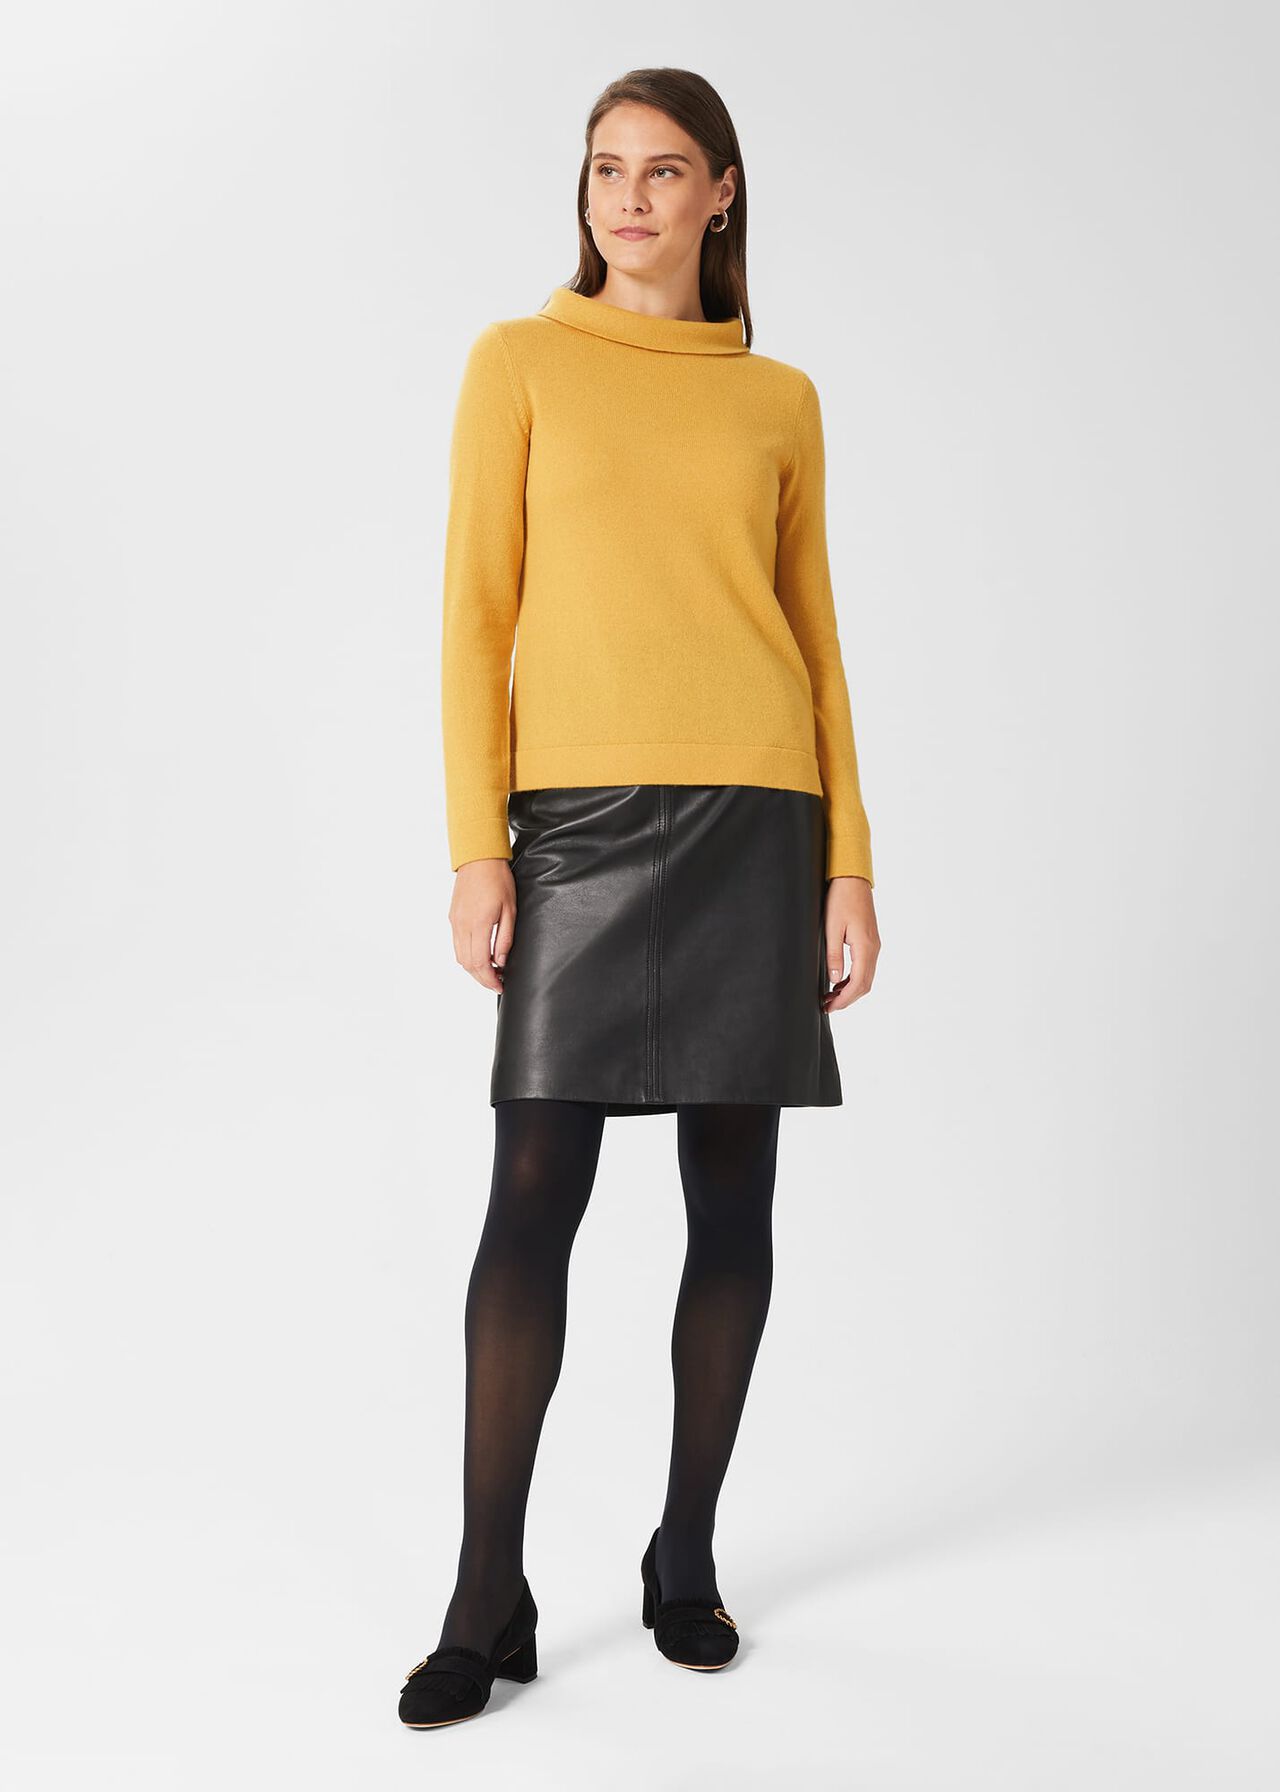 Audrey Wool Cashmere Sweater, Golden Yellow, hi-res